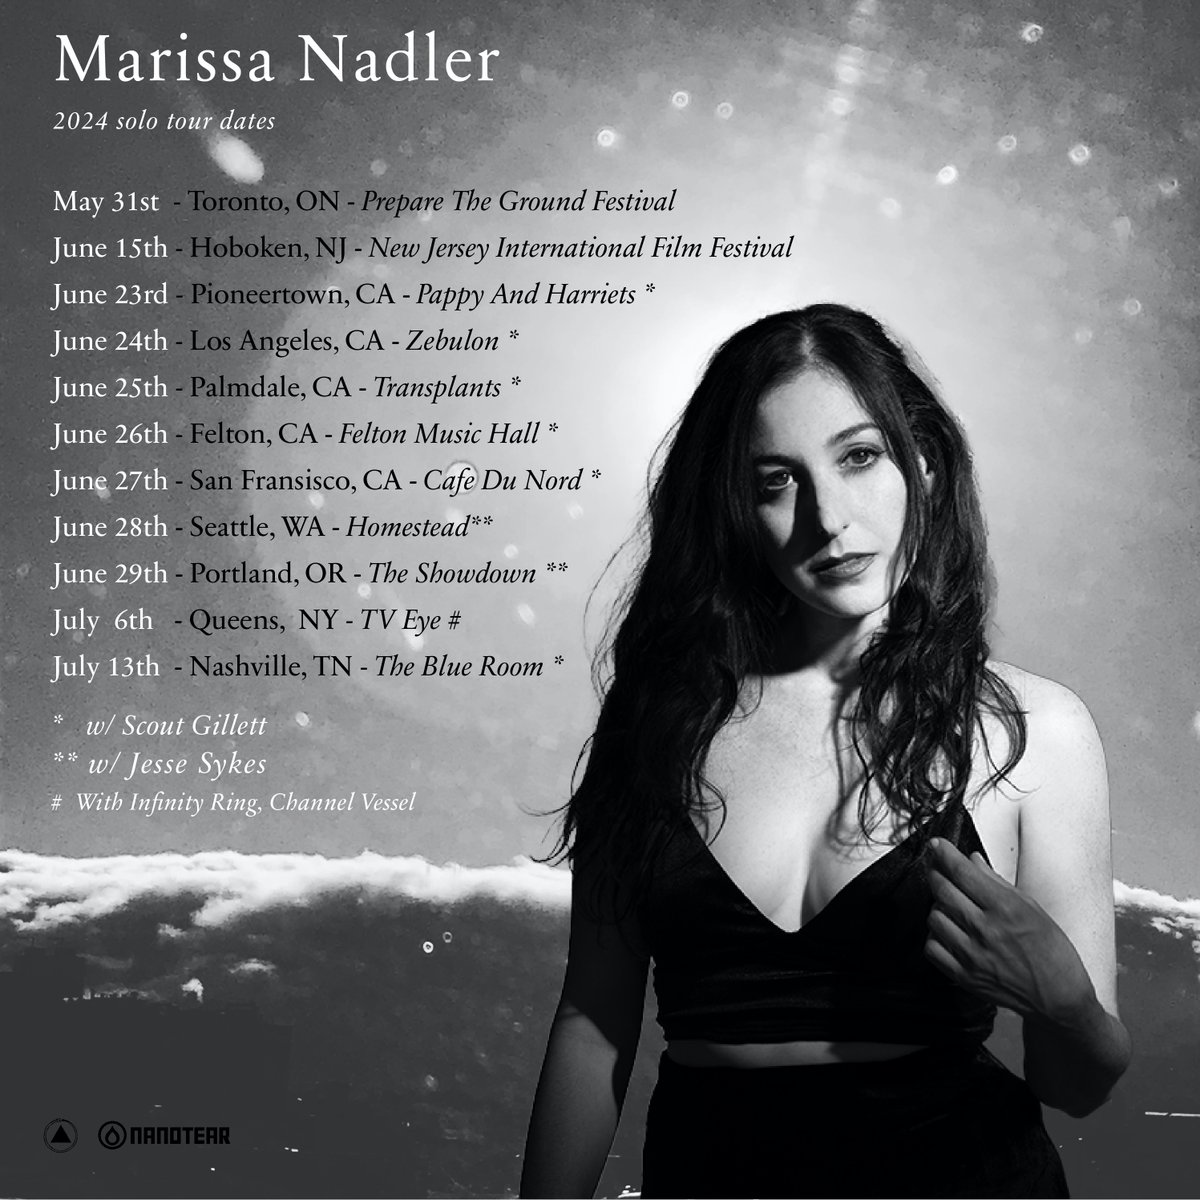 Excited to announce these tour dates- on sale today! @SacredBones @nanotear